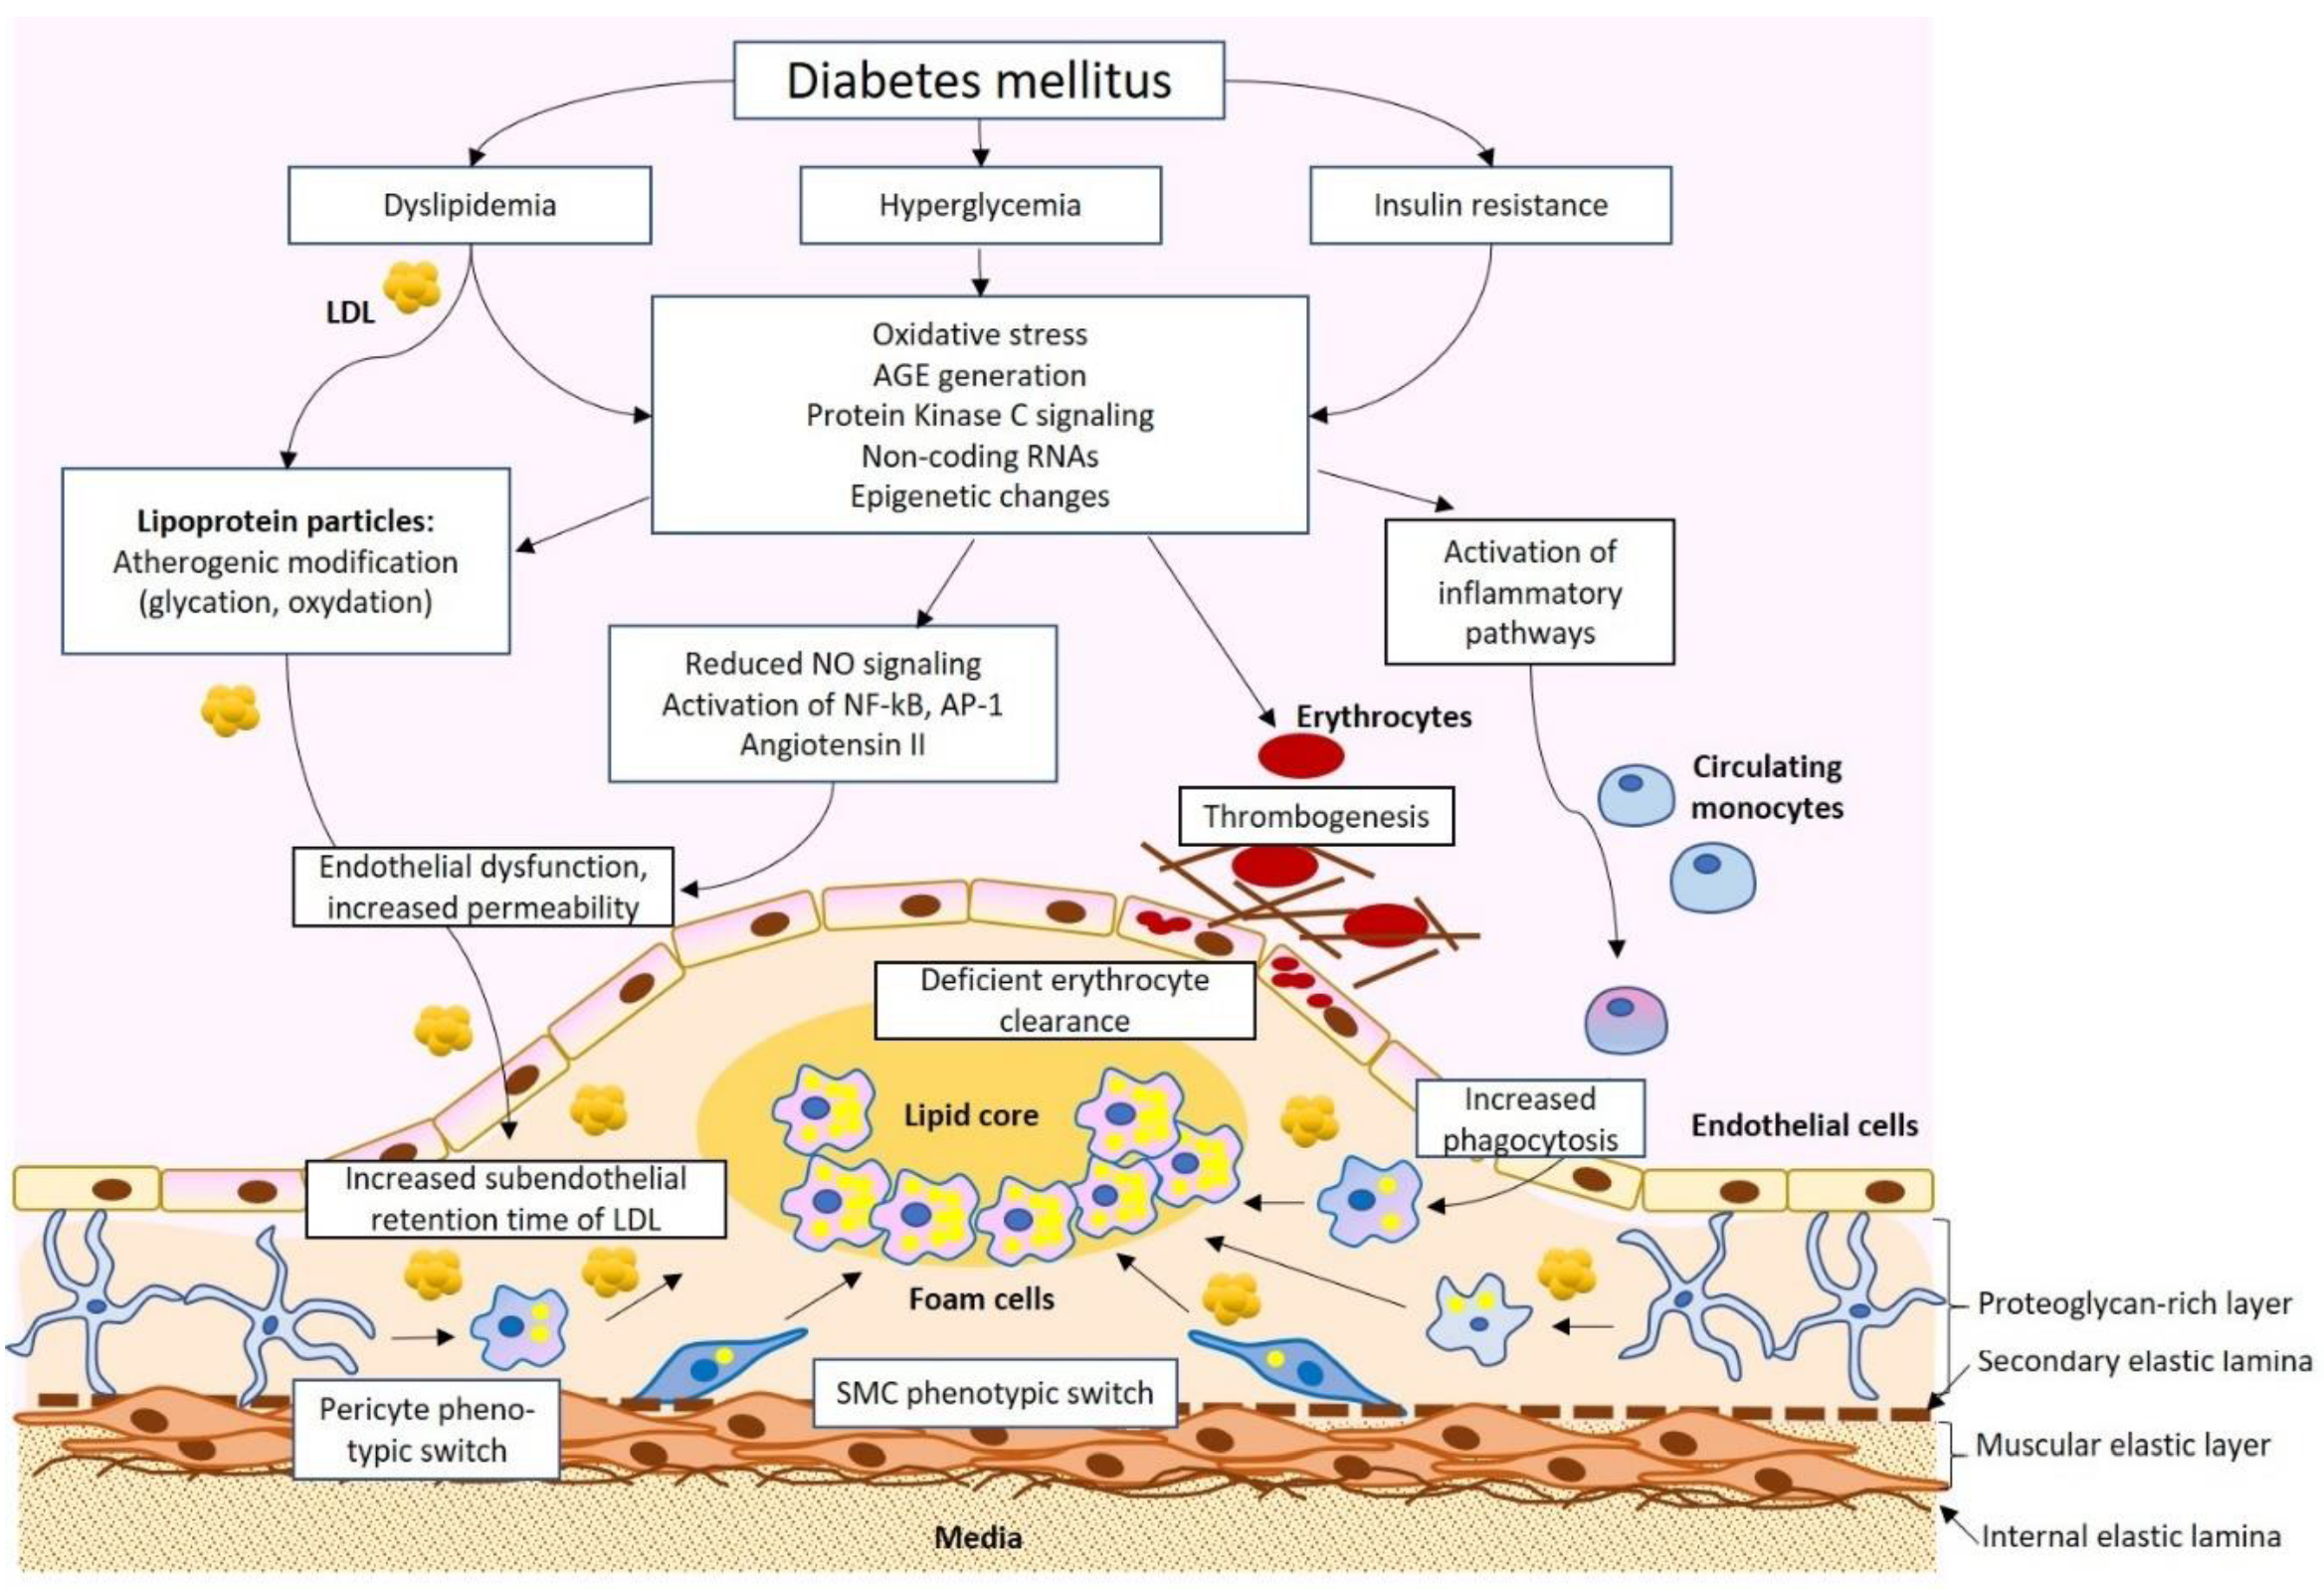 Chronic hyperglycemia and inflammation